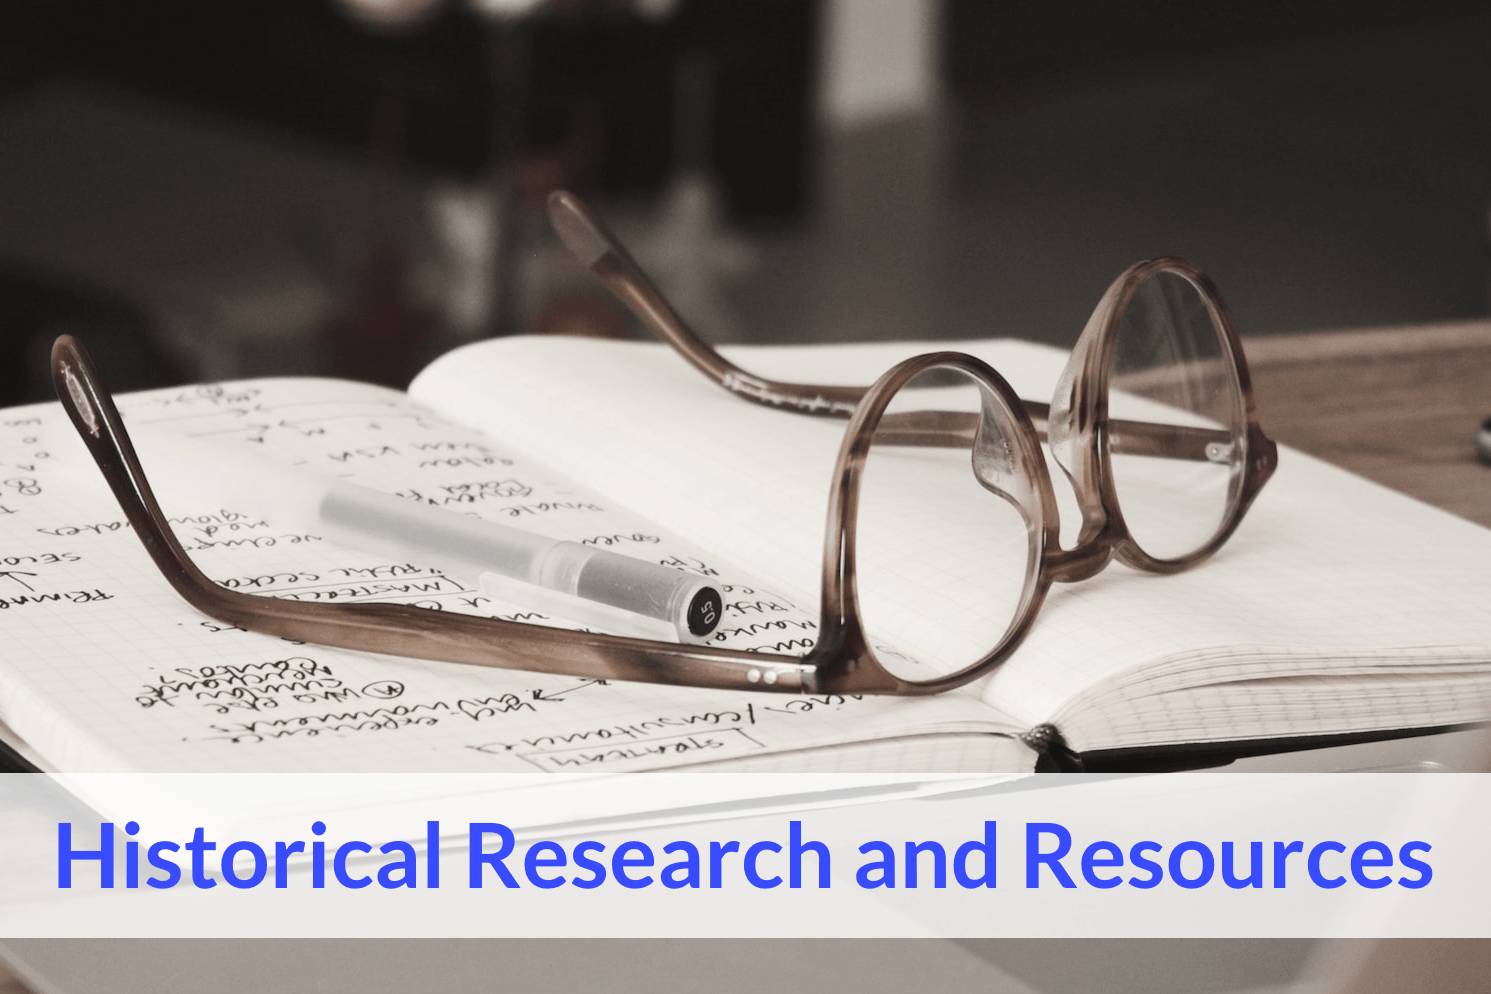 Historical Research and Resources